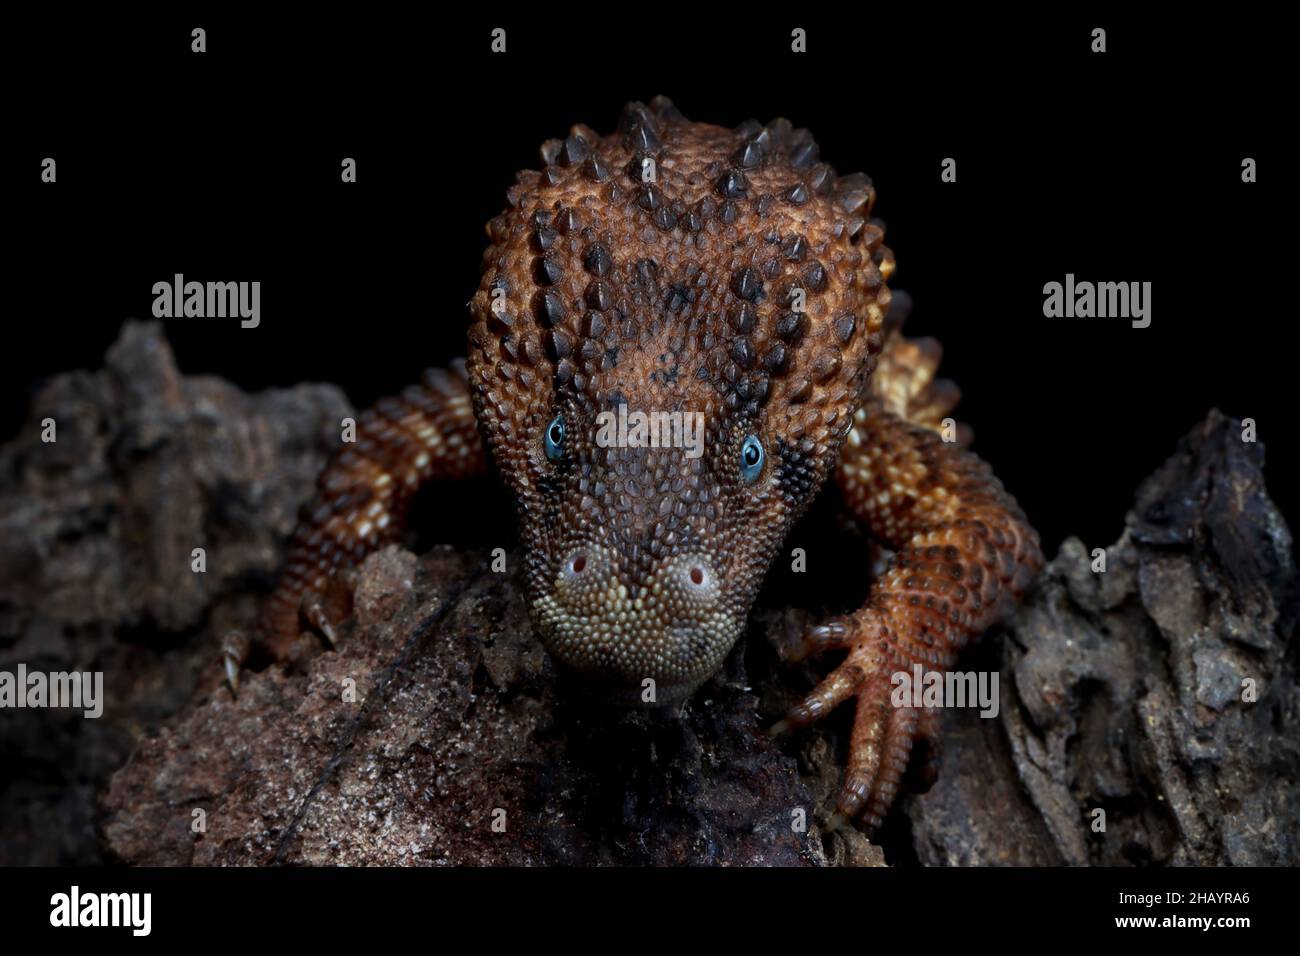 Close-up of an earless Monitor lizard, Indonesia Stock Photo